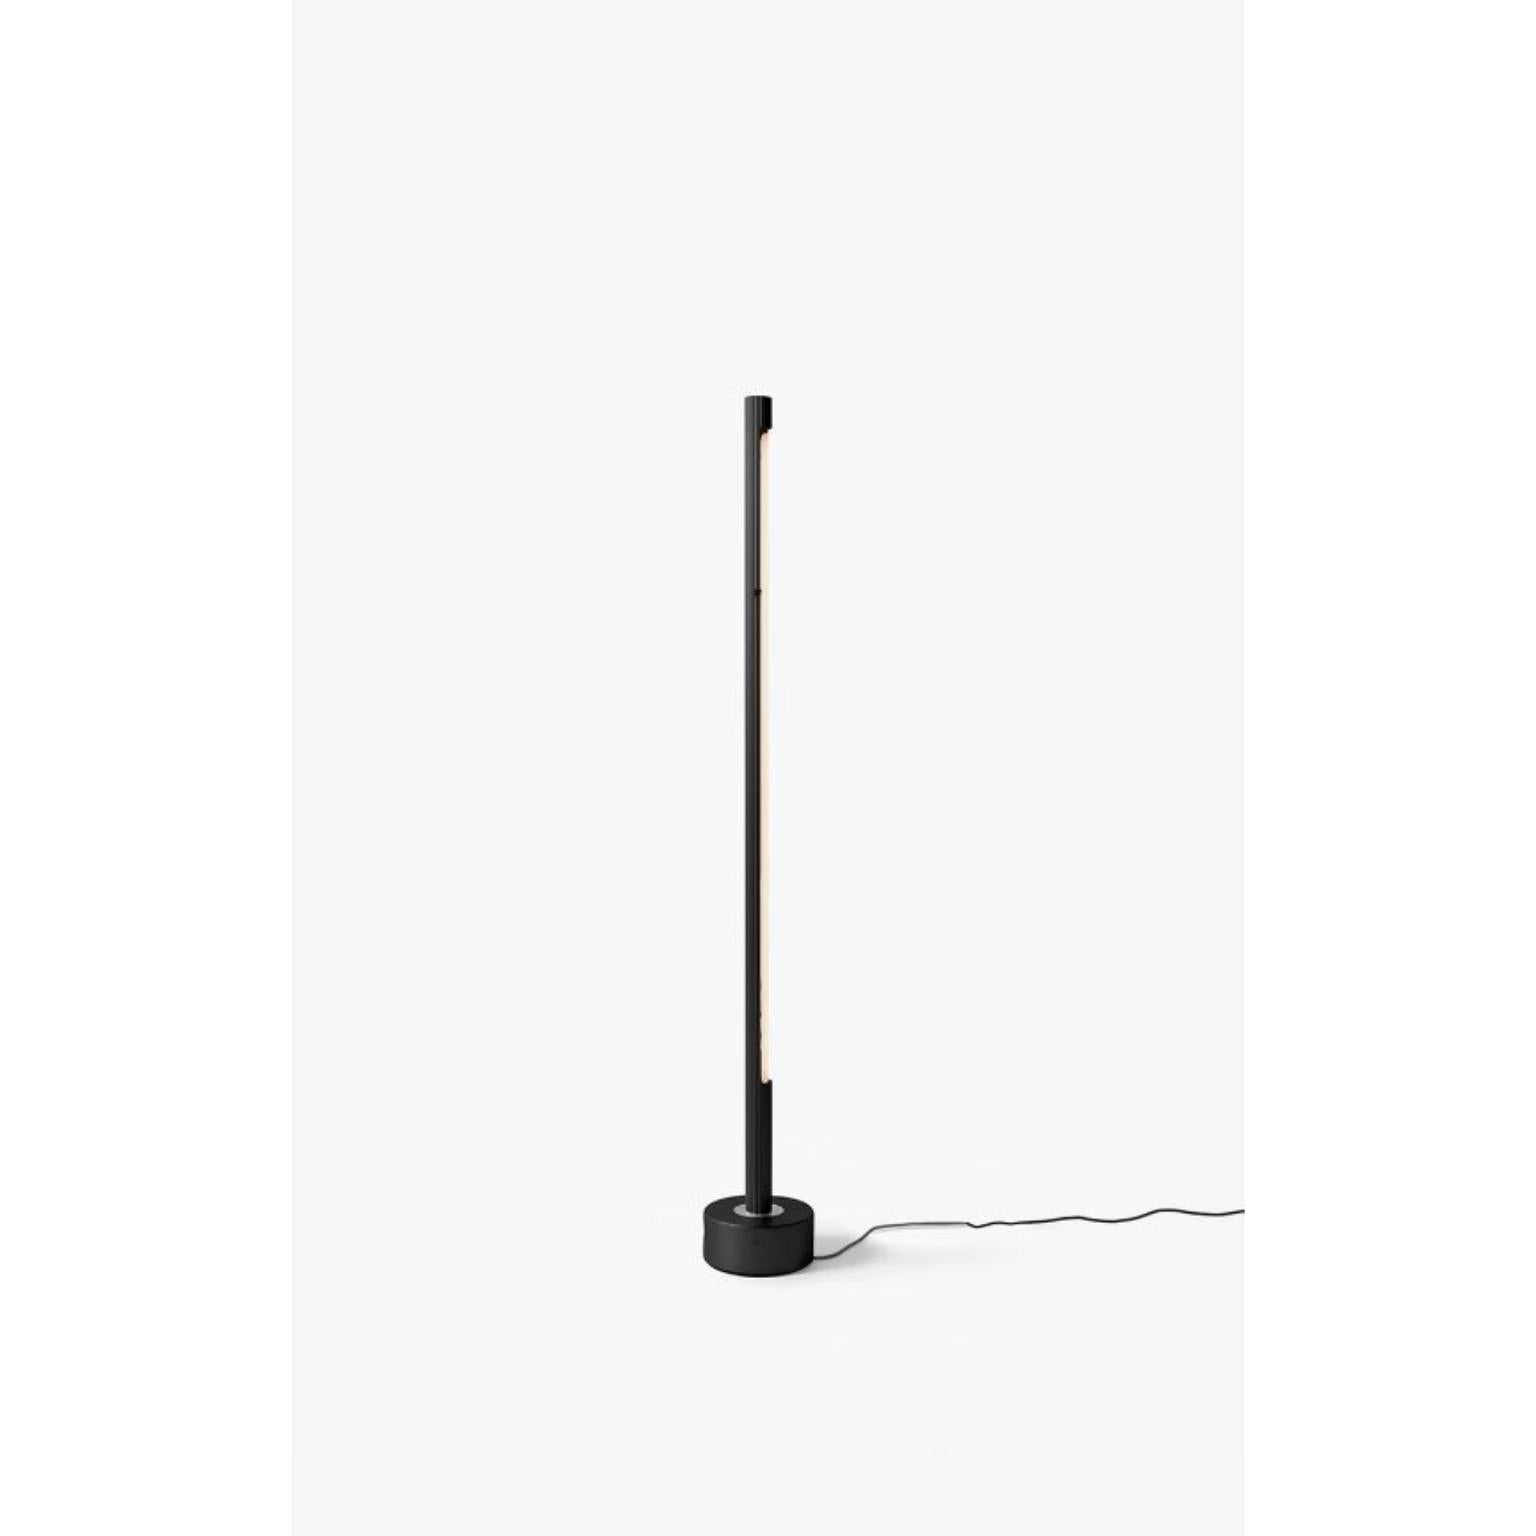 Black Palo Floor Lamp by Wentz
Dimensions: D 22 x W 22 x H 150 cm
Materials: Aluminum, Acrylic, Steel, Stainless Steel.


WEIGHT: 8,7kg / 19,2 lbs
Colors: Black, Aluminum
LIGHT SOURCE: Built-in LED. 14W. 1680lm. 2700K. 90 CRI.
DIMMING No.
VOLTAGE: